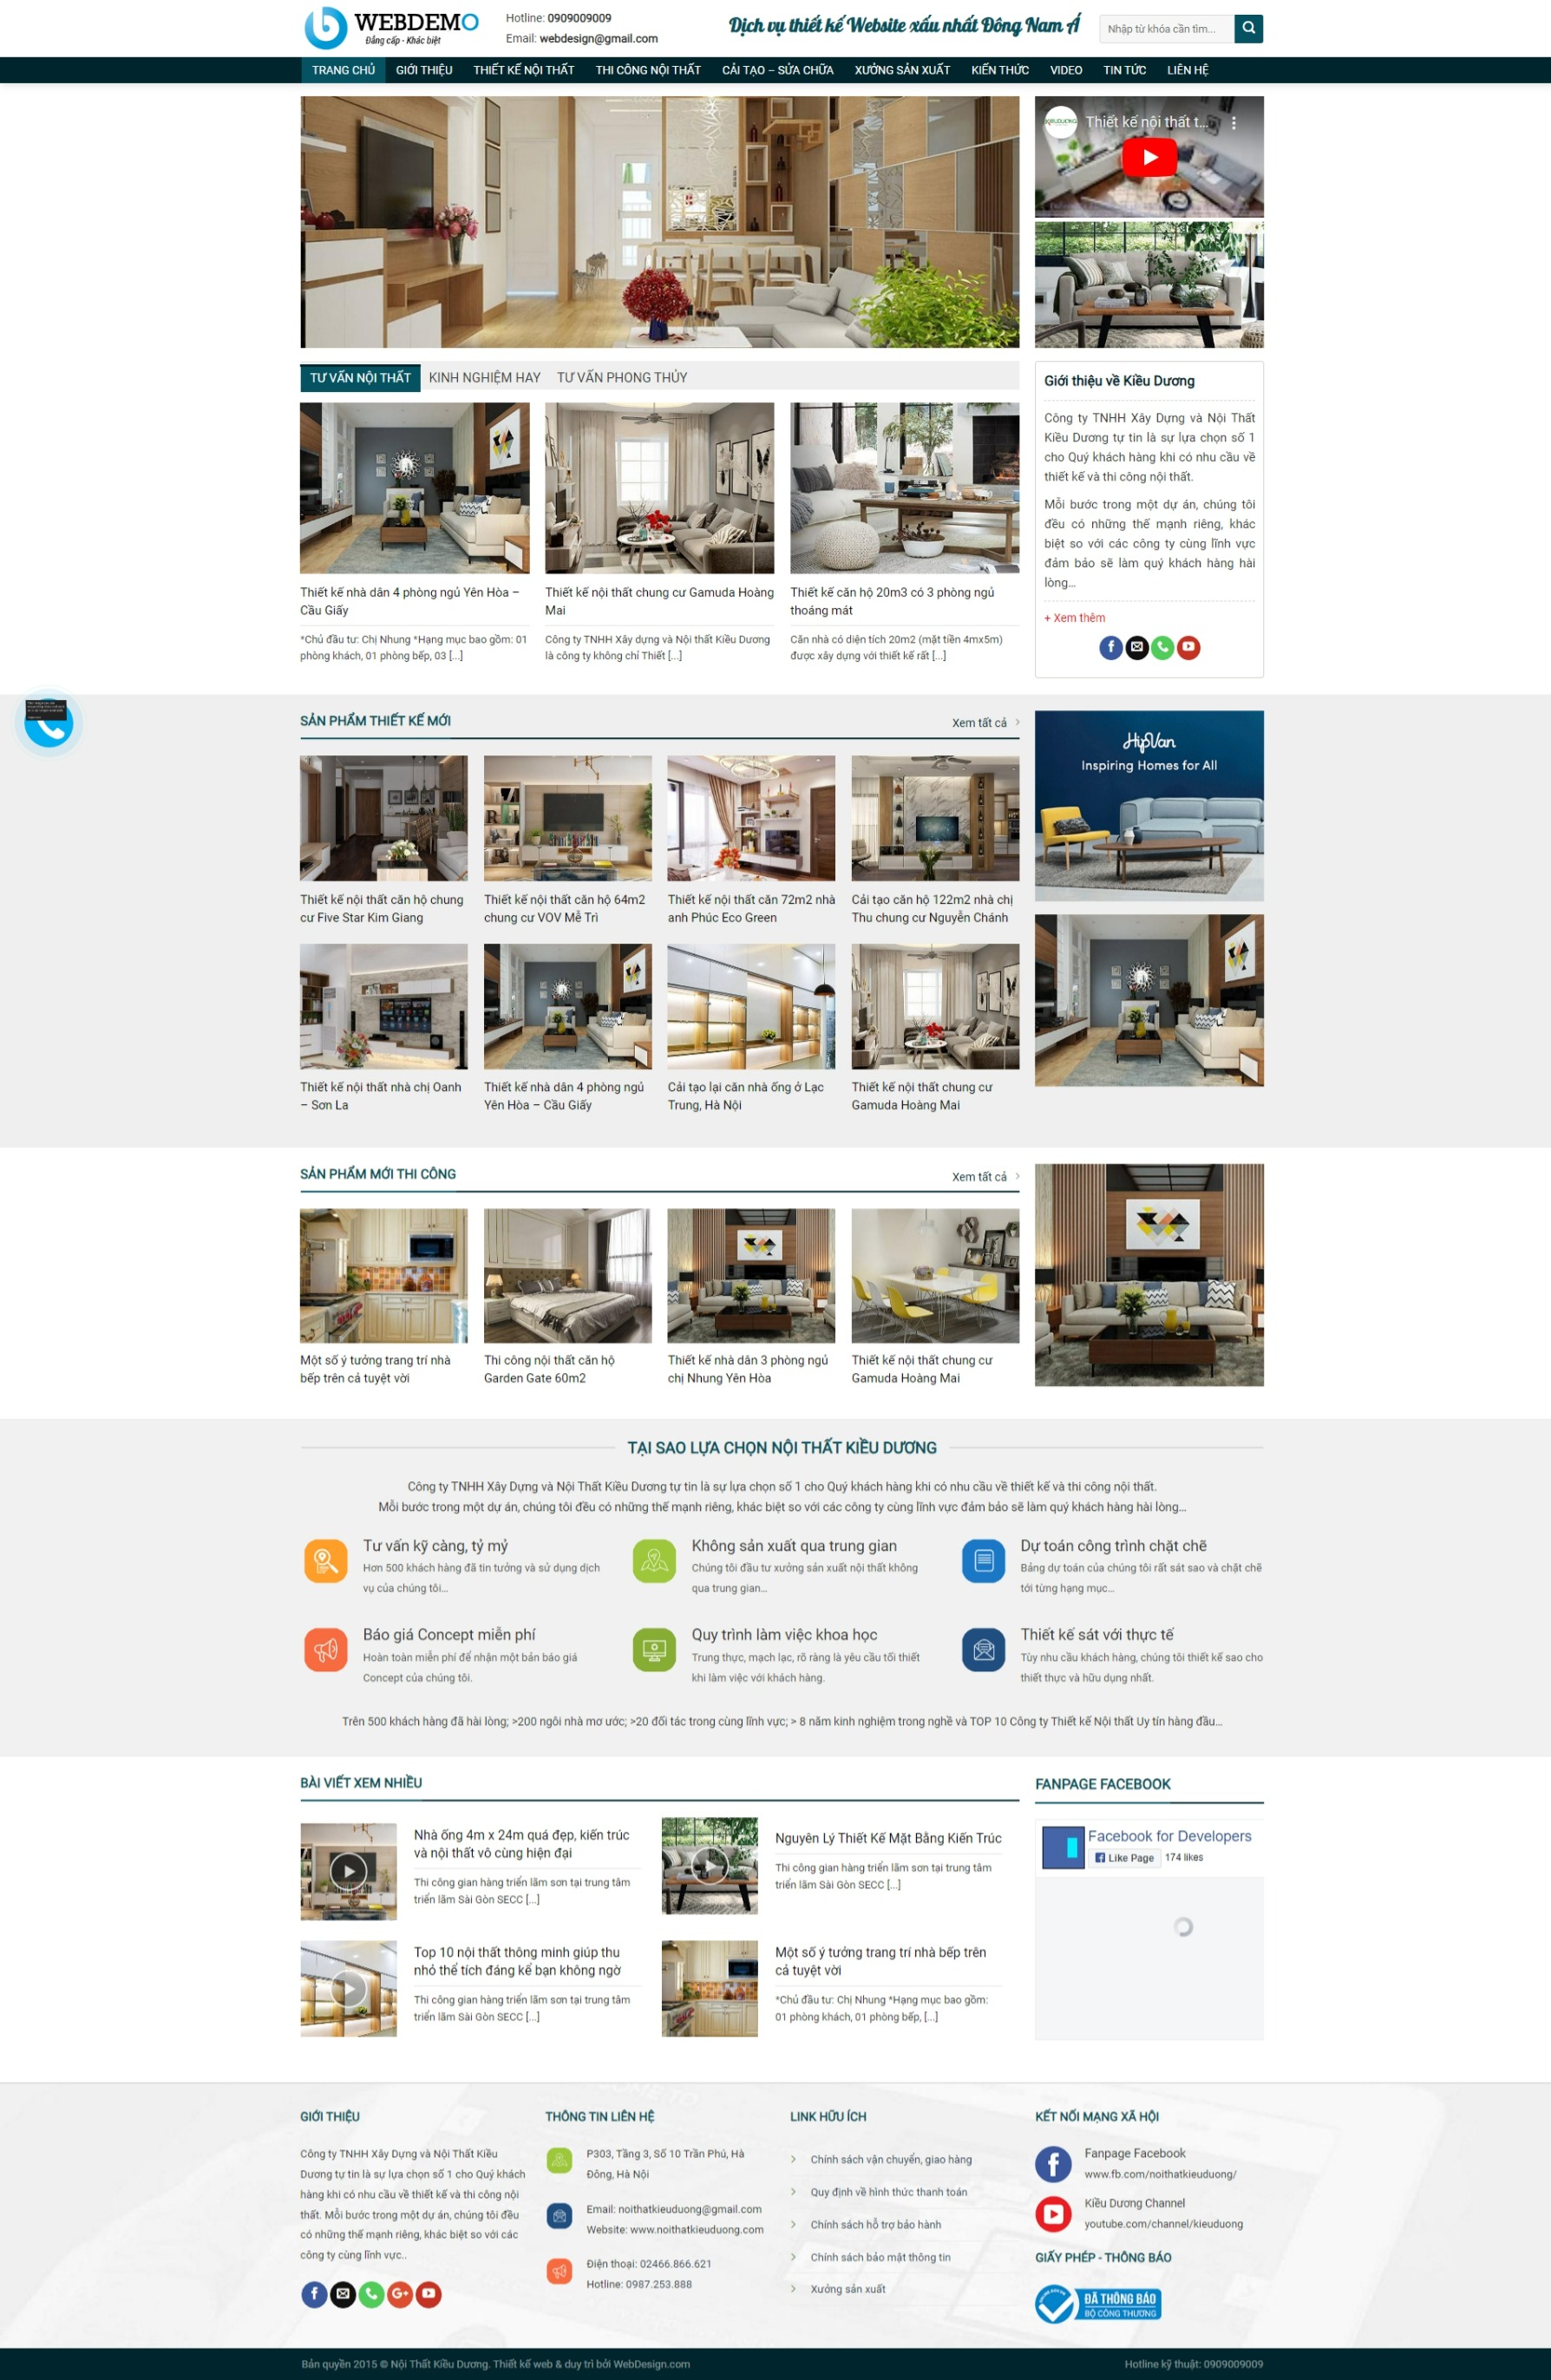 Website introducing architectural design company with news by wordpress